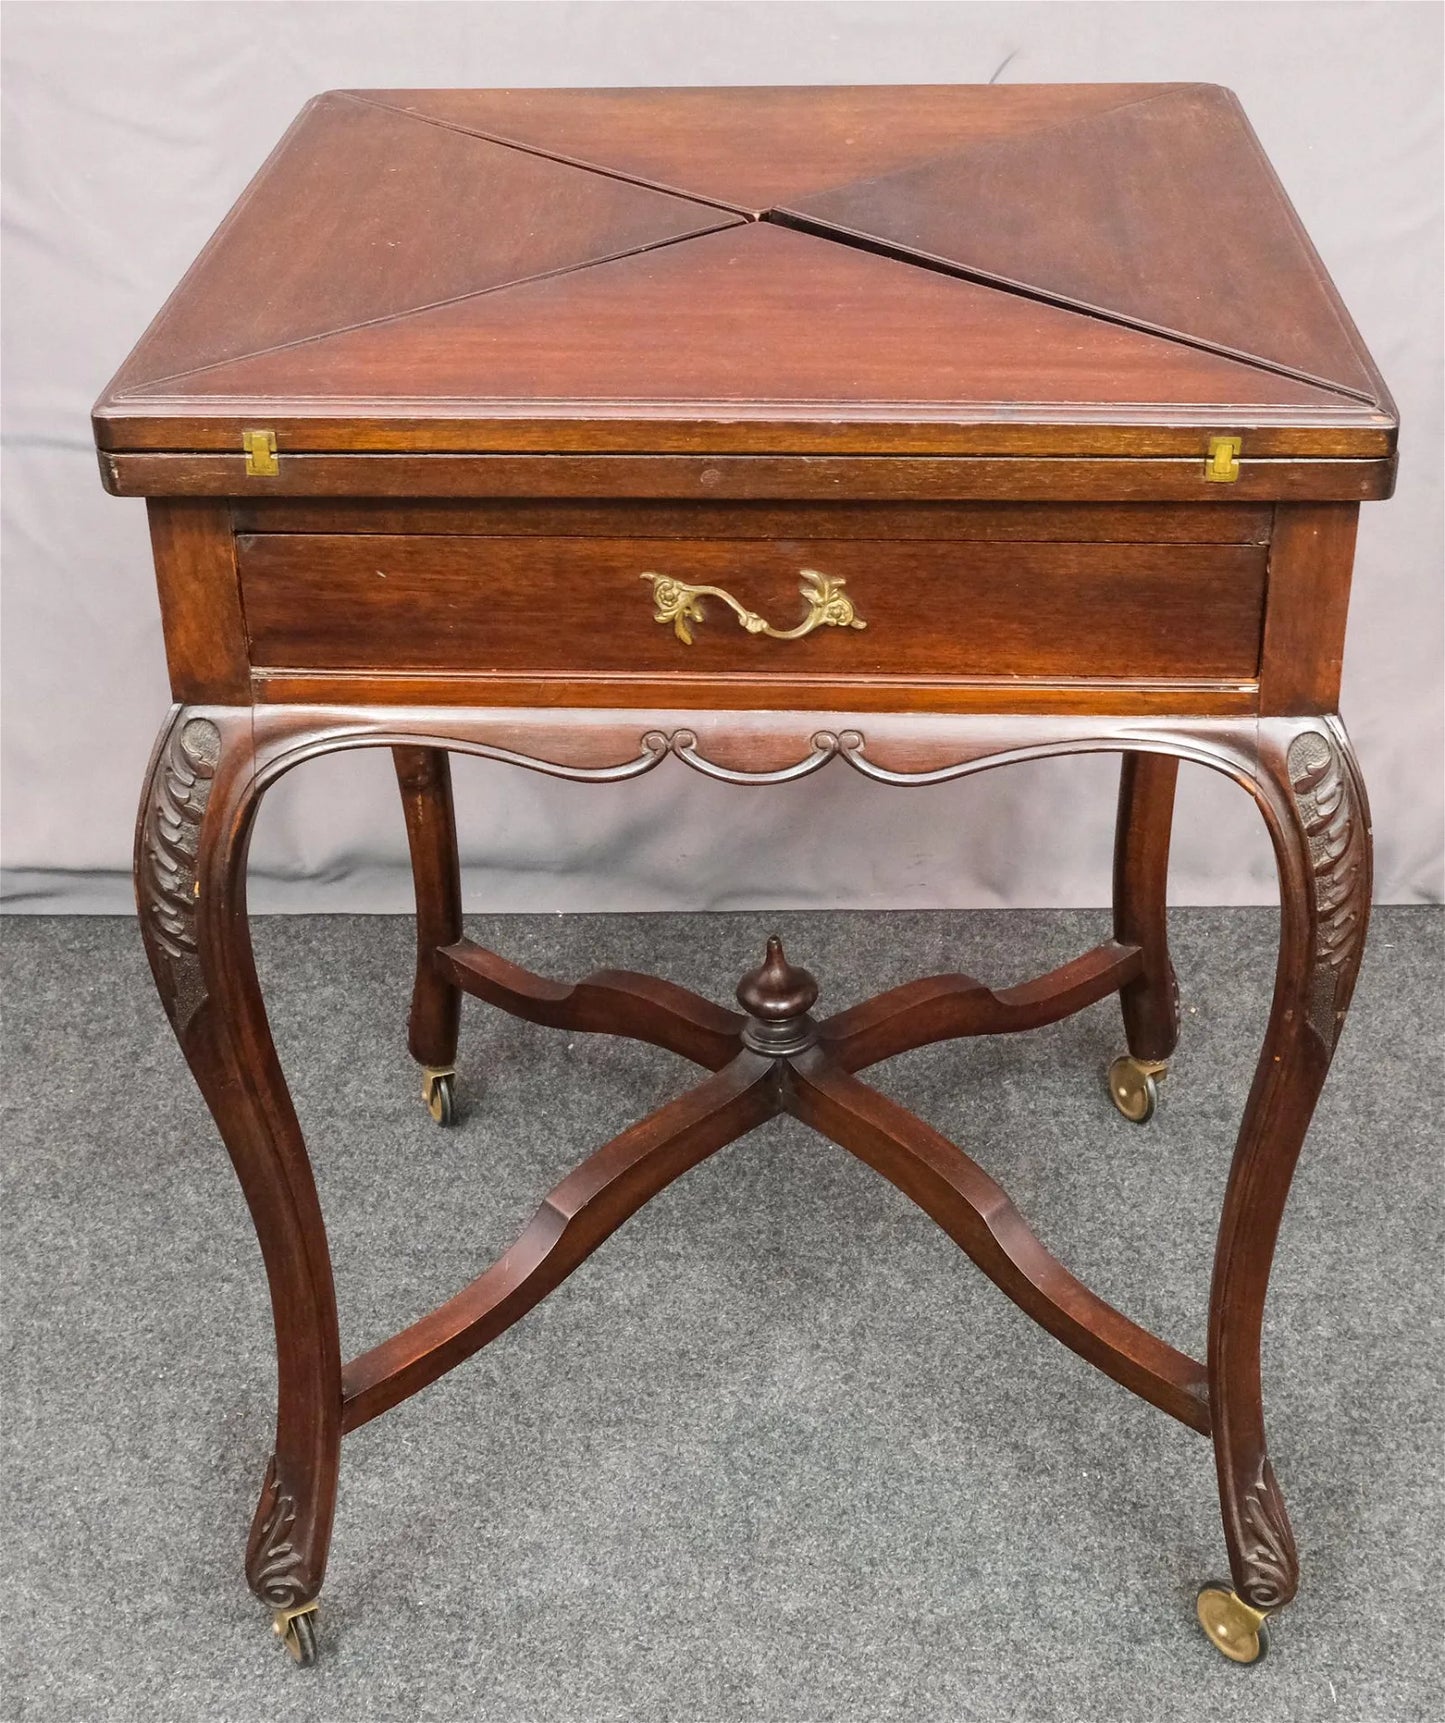 Late 19th C. Folding Envelope Games Table